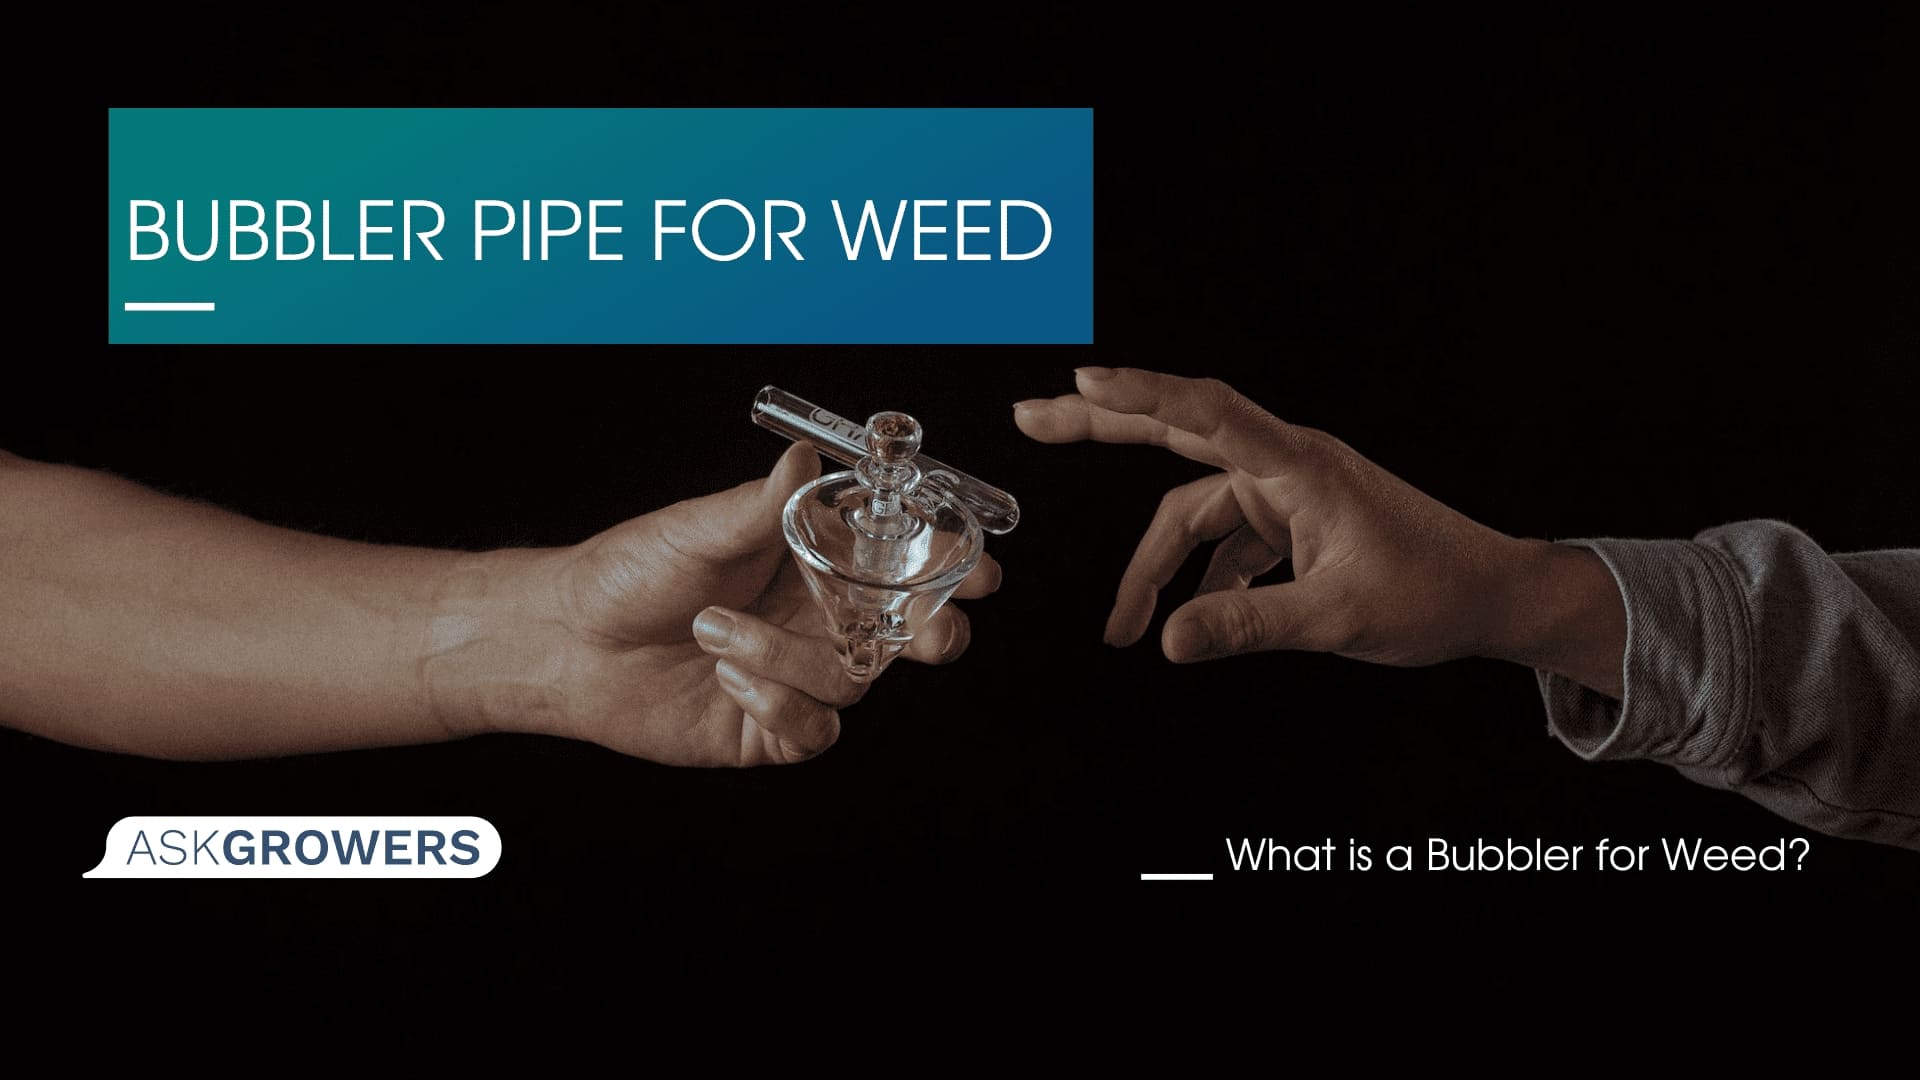 Bubbler pipe for weed